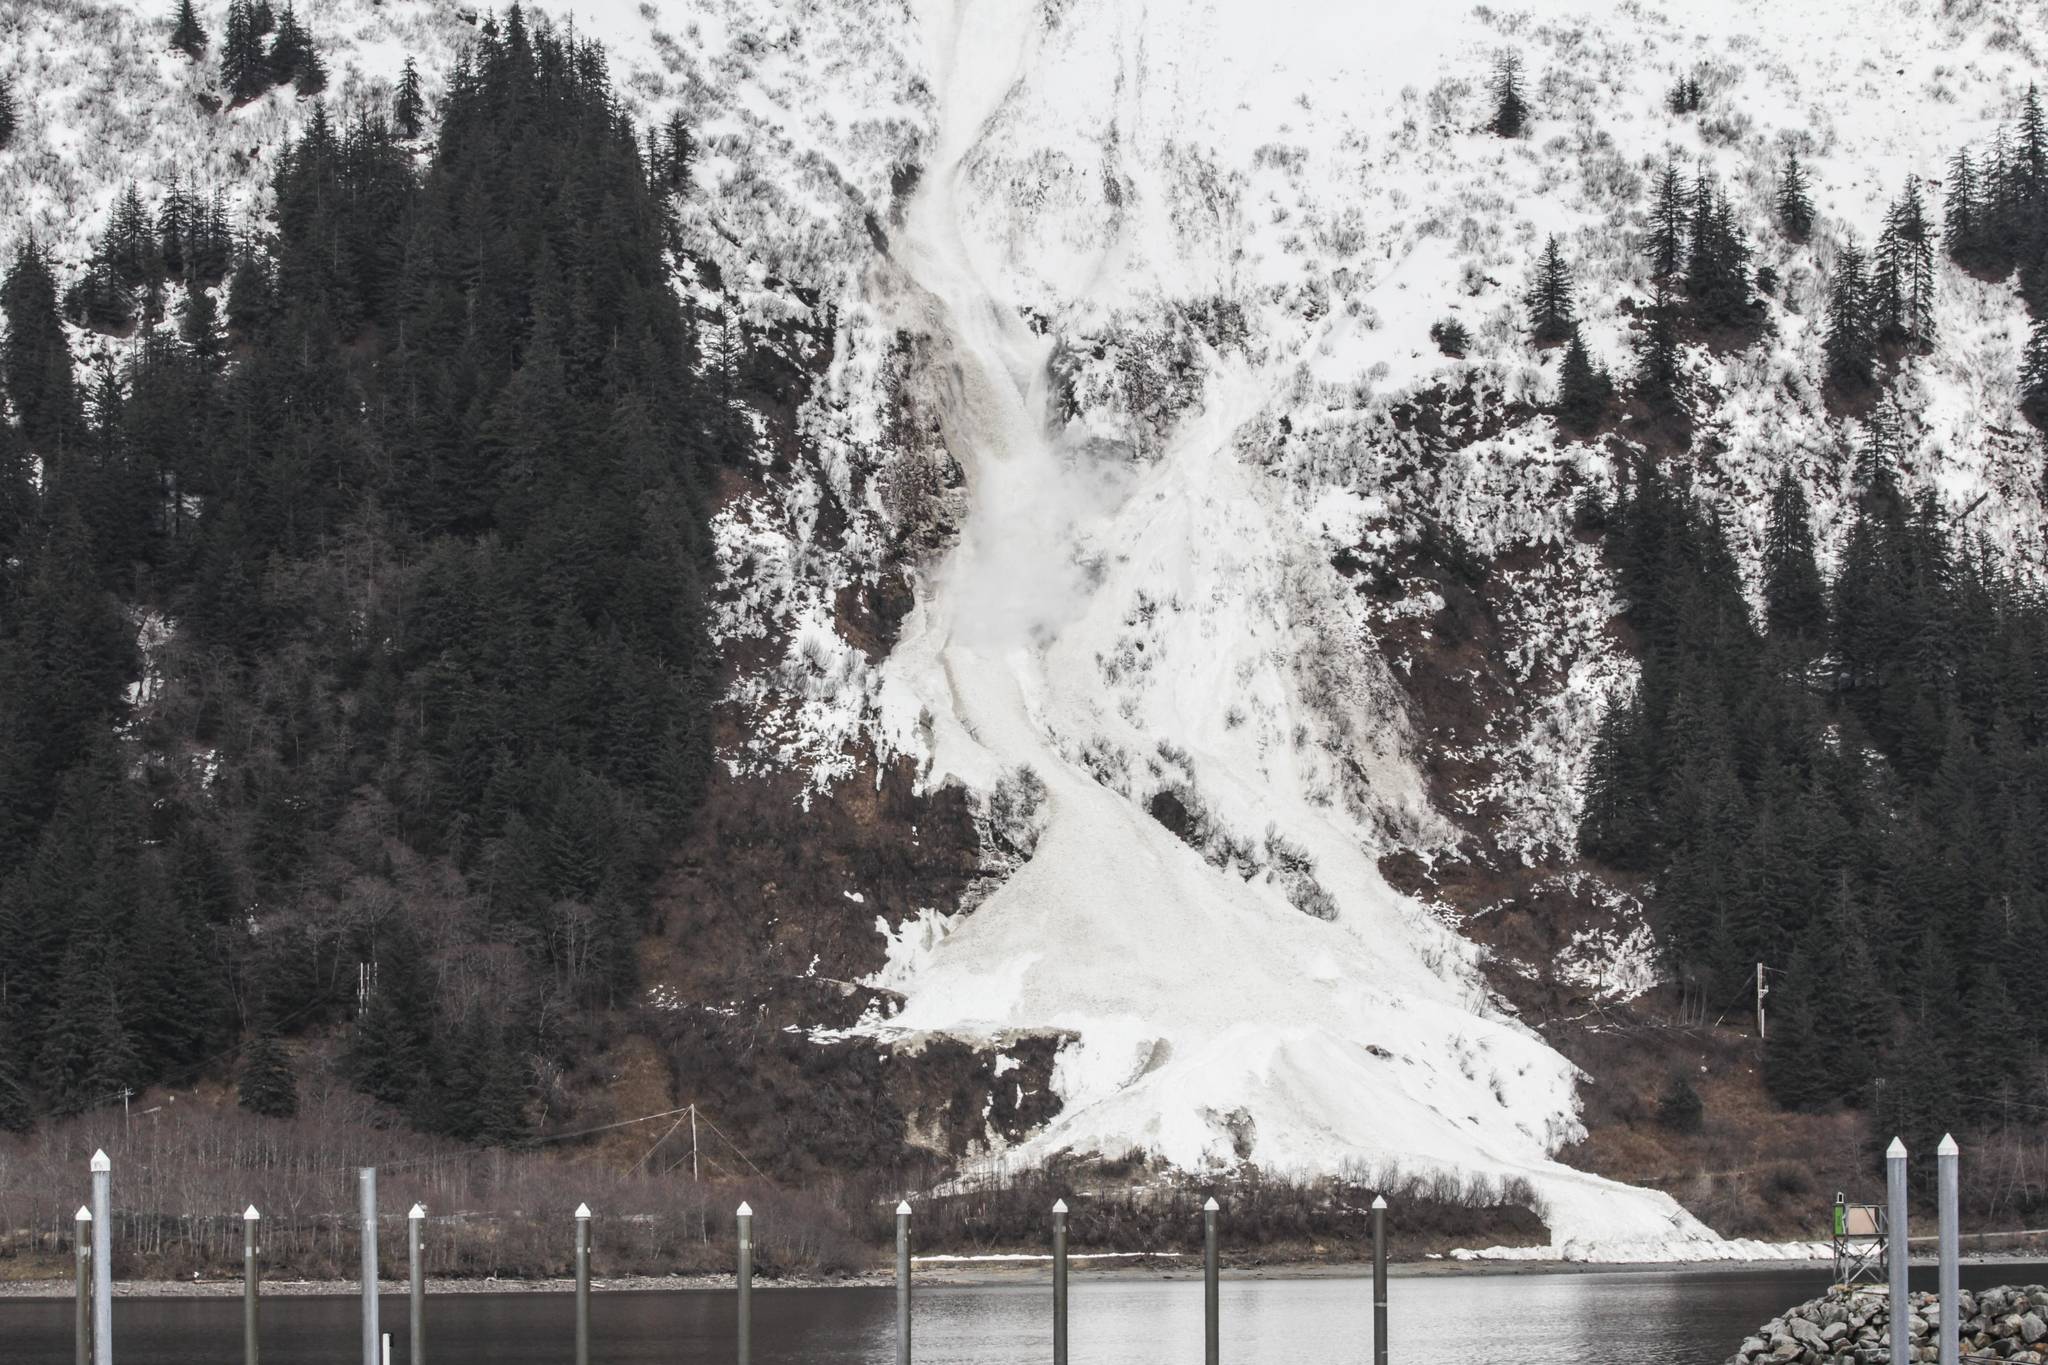 Michael S. Lockett / Juneau Empire 
The Alaska Department of Transportation and Public Facilities triggered an avalanche as a mitigation measure above Thane Road on April 15, 2021.